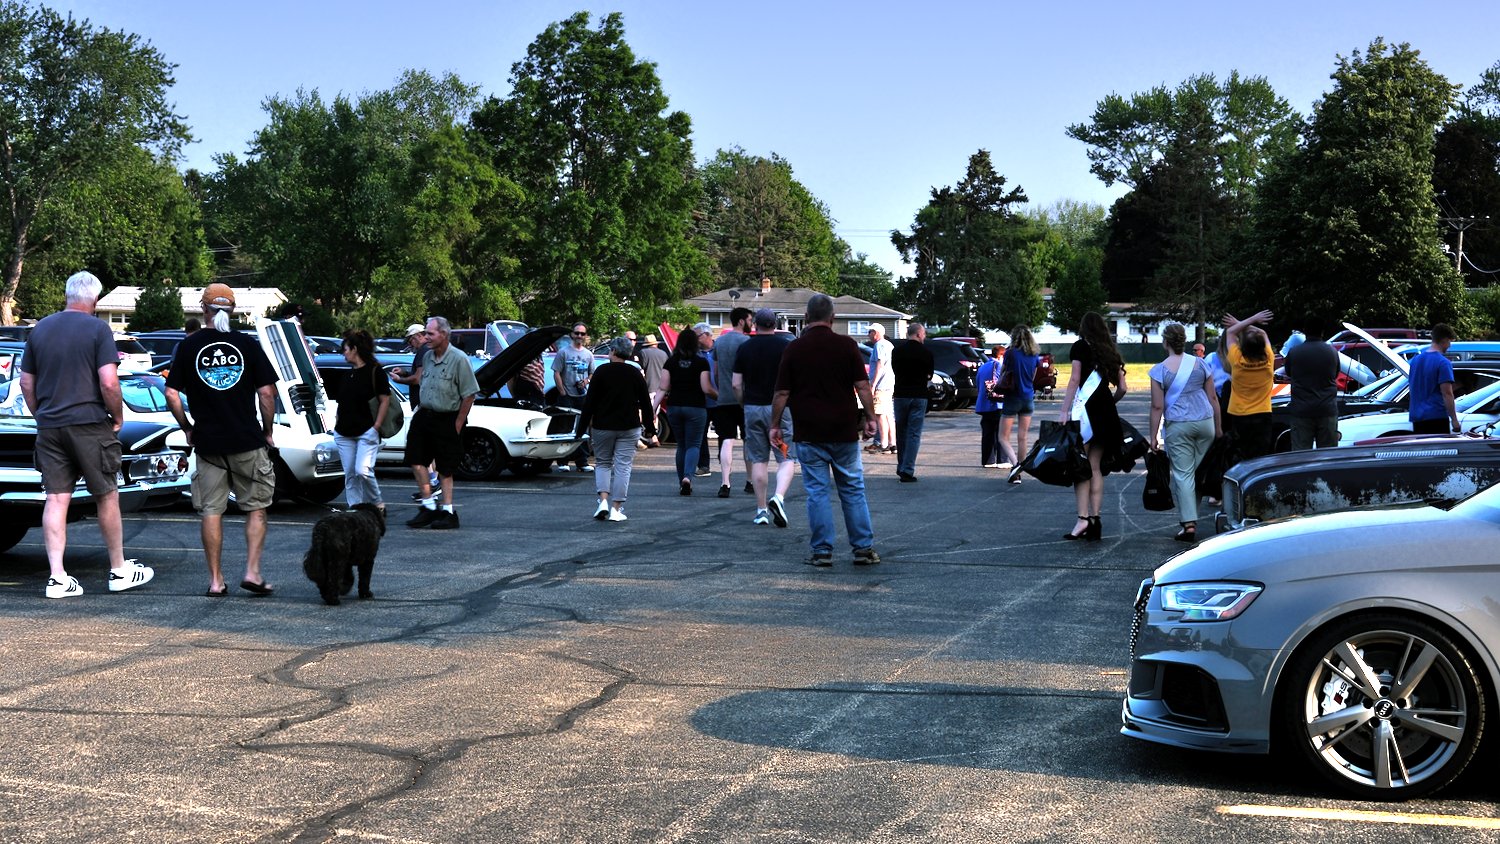 Spectators strolling among the cars at the Cary Cruise Night.